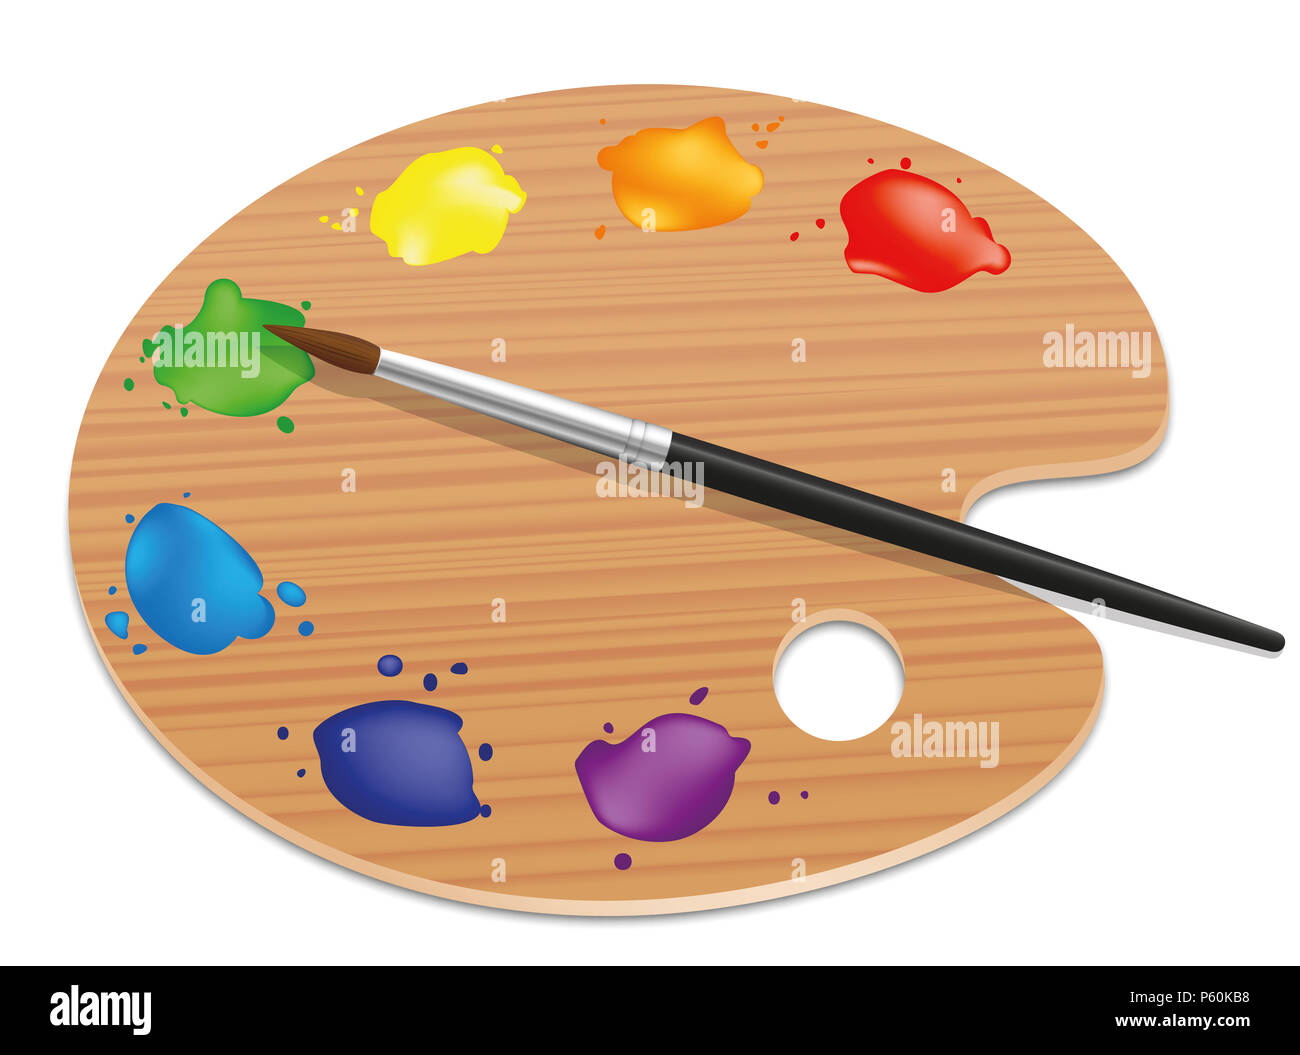 https://c8.alamy.com/comp/P60KB8/artists-palette-painting-wood-board-with-different-colors-and-a-paintbrush-illustration-on-white-background-P60KB8.jpg